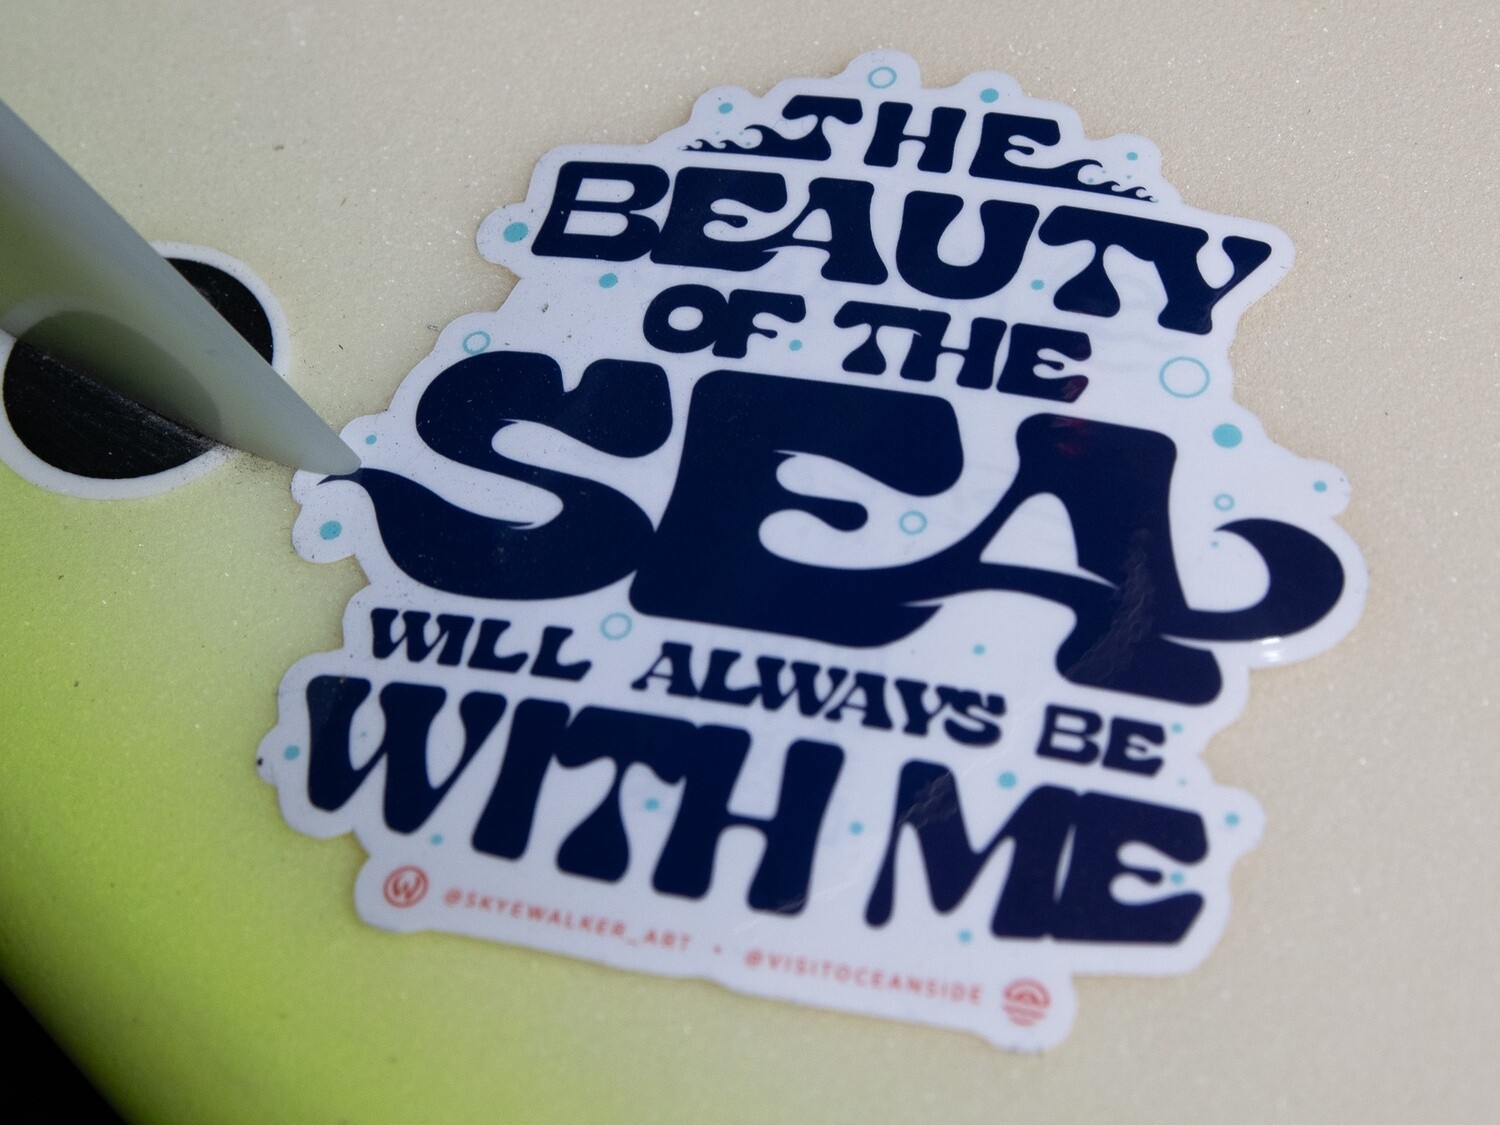 Skye Walker Collection “The Beauty of the Sea” Sticker